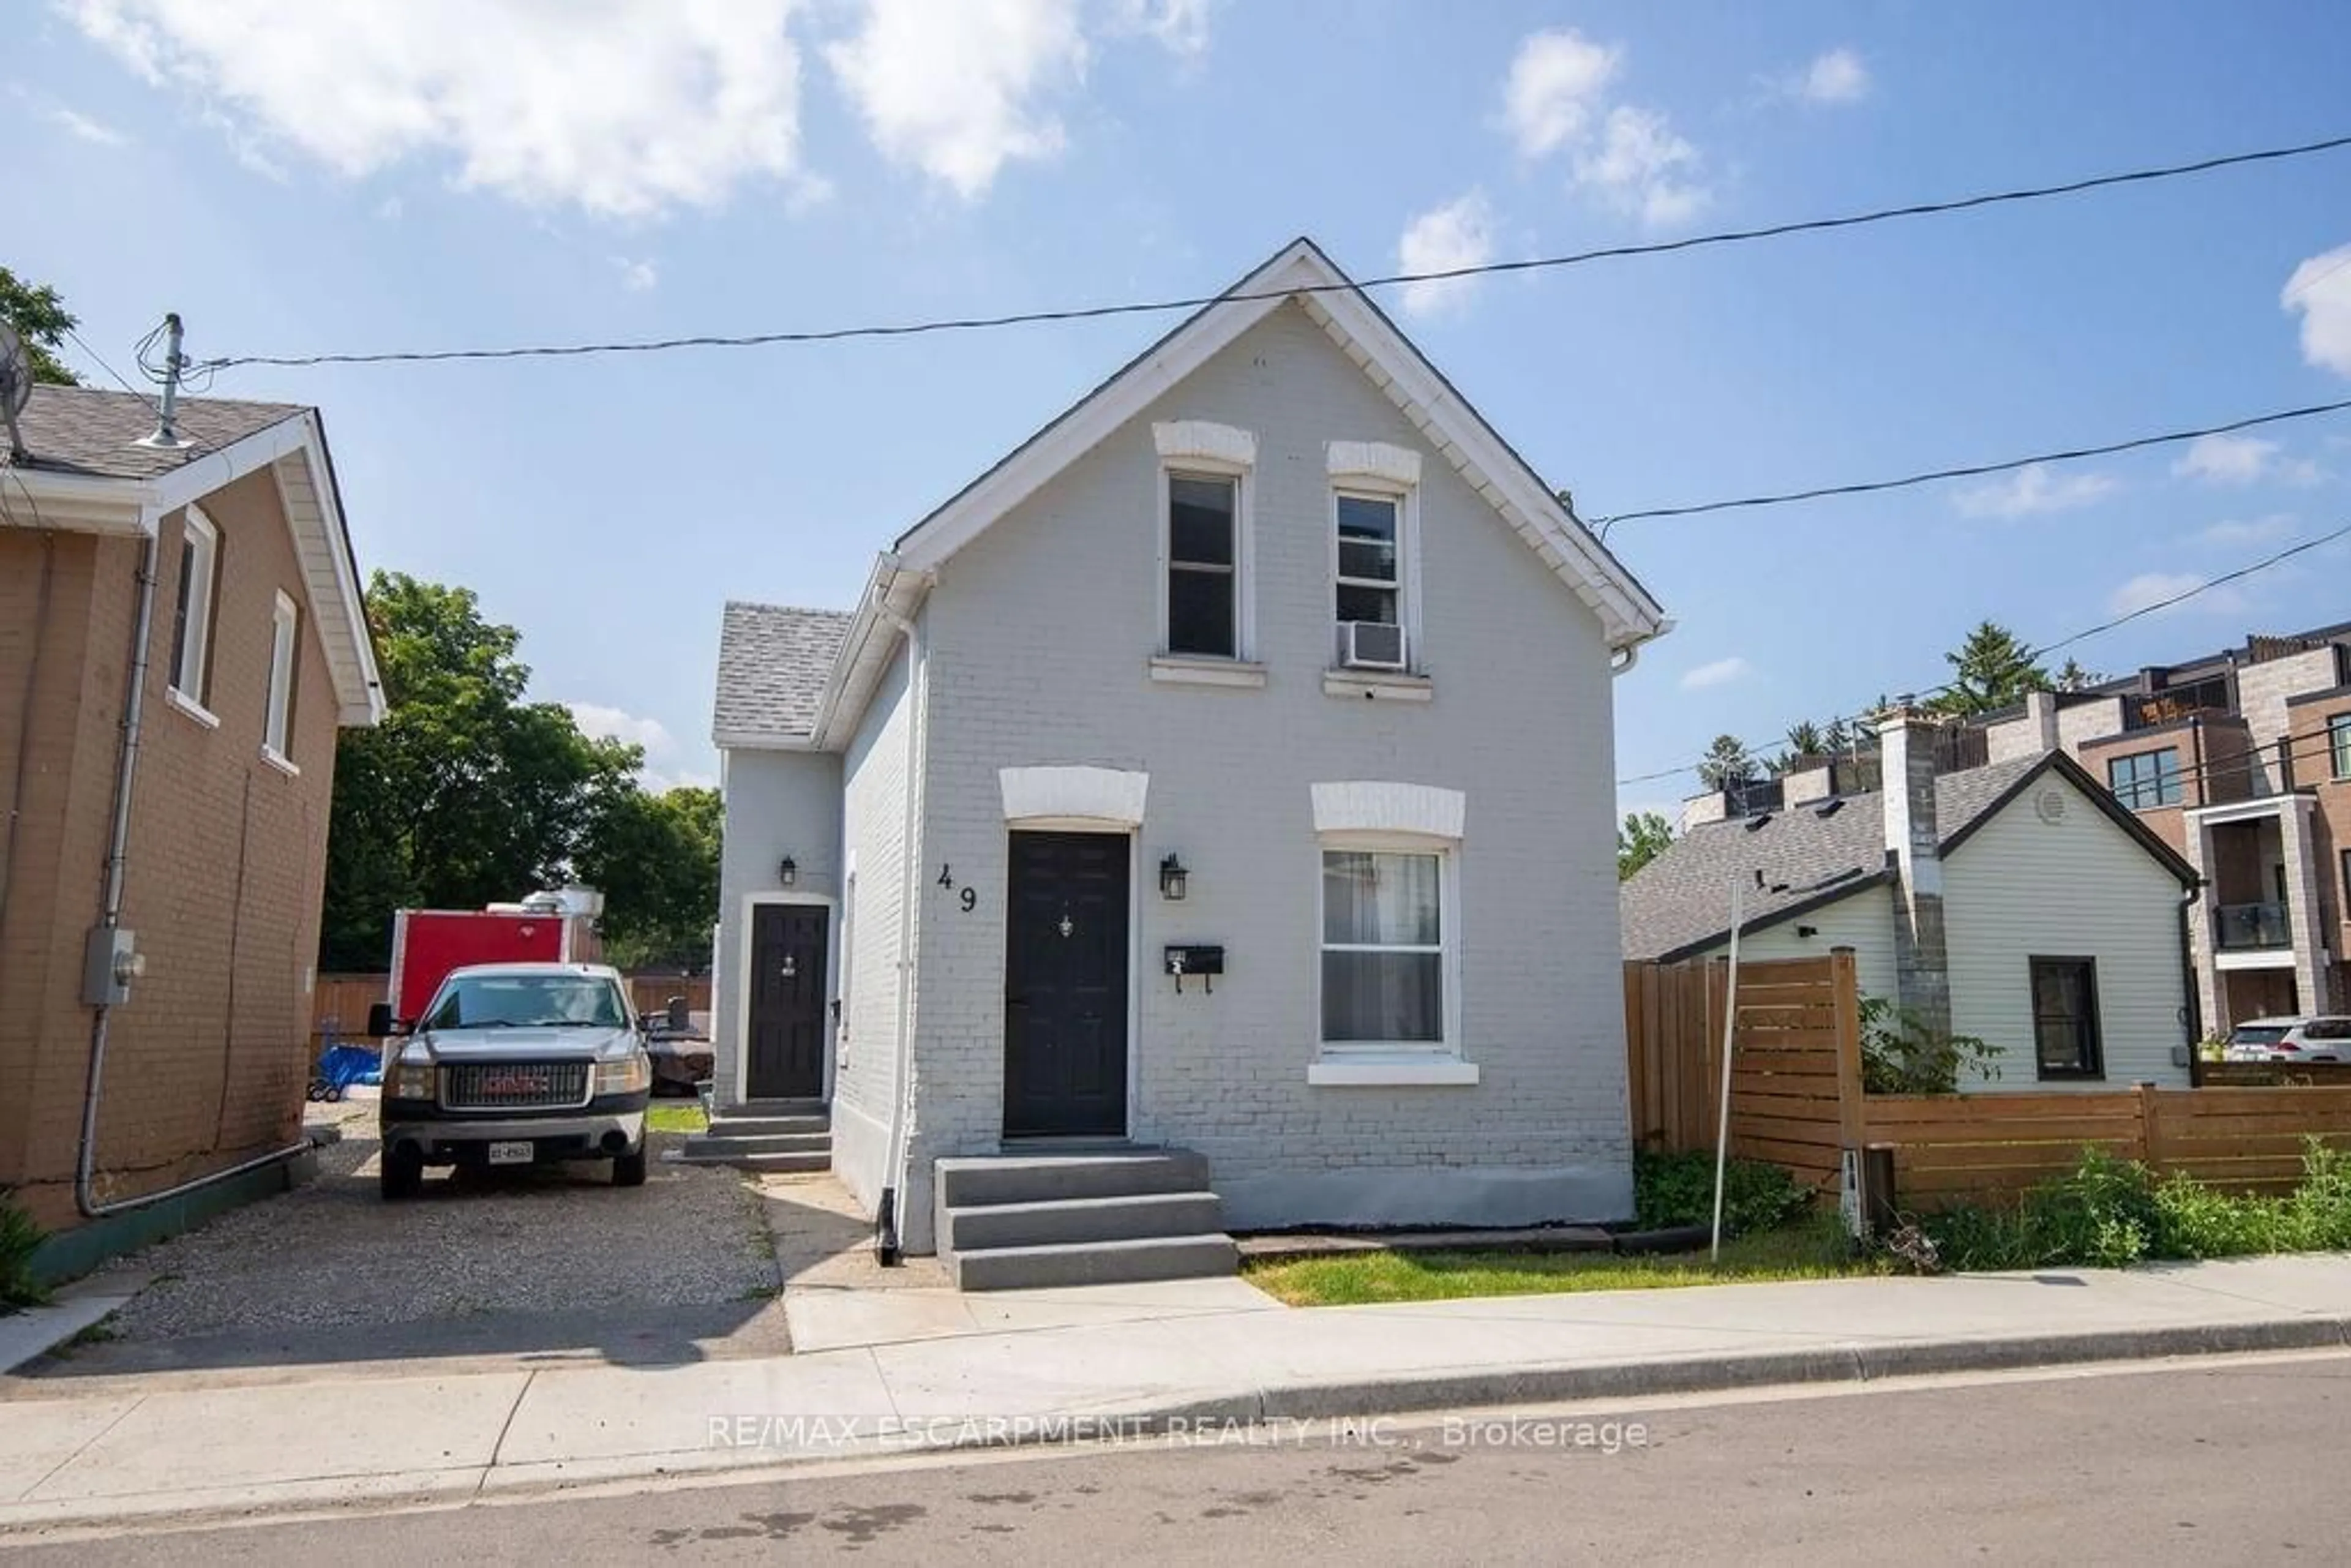 Frontside or backside of a home for 49 Jarvis St, Brantford Ontario N3T 4A9